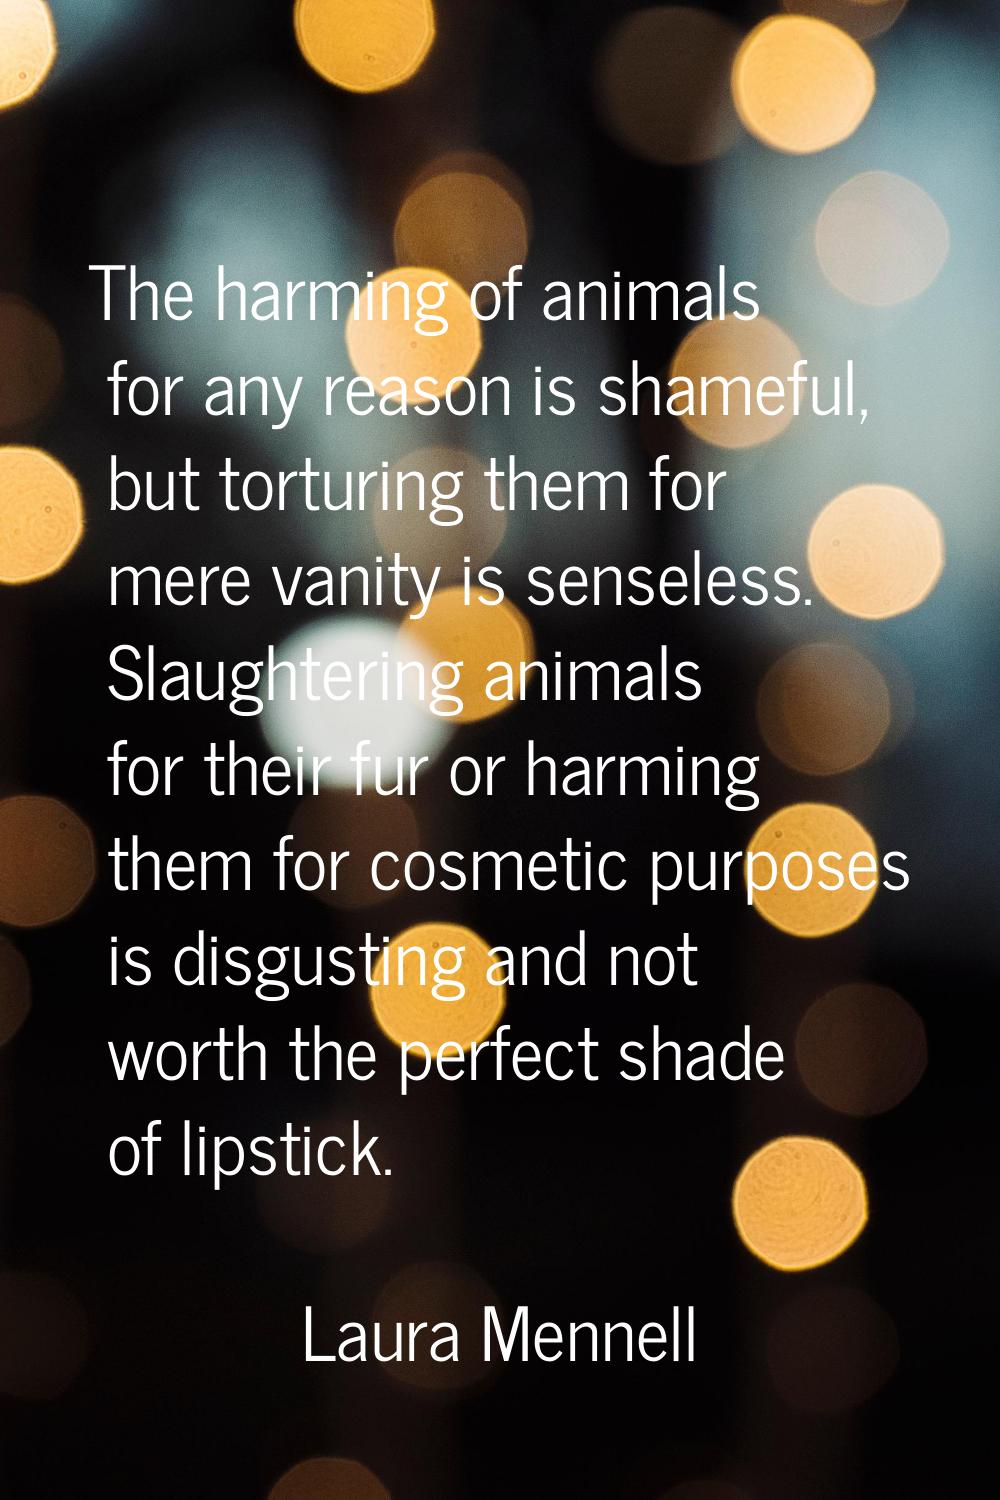 The harming of animals for any reason is shameful, but torturing them for mere vanity is senseless.